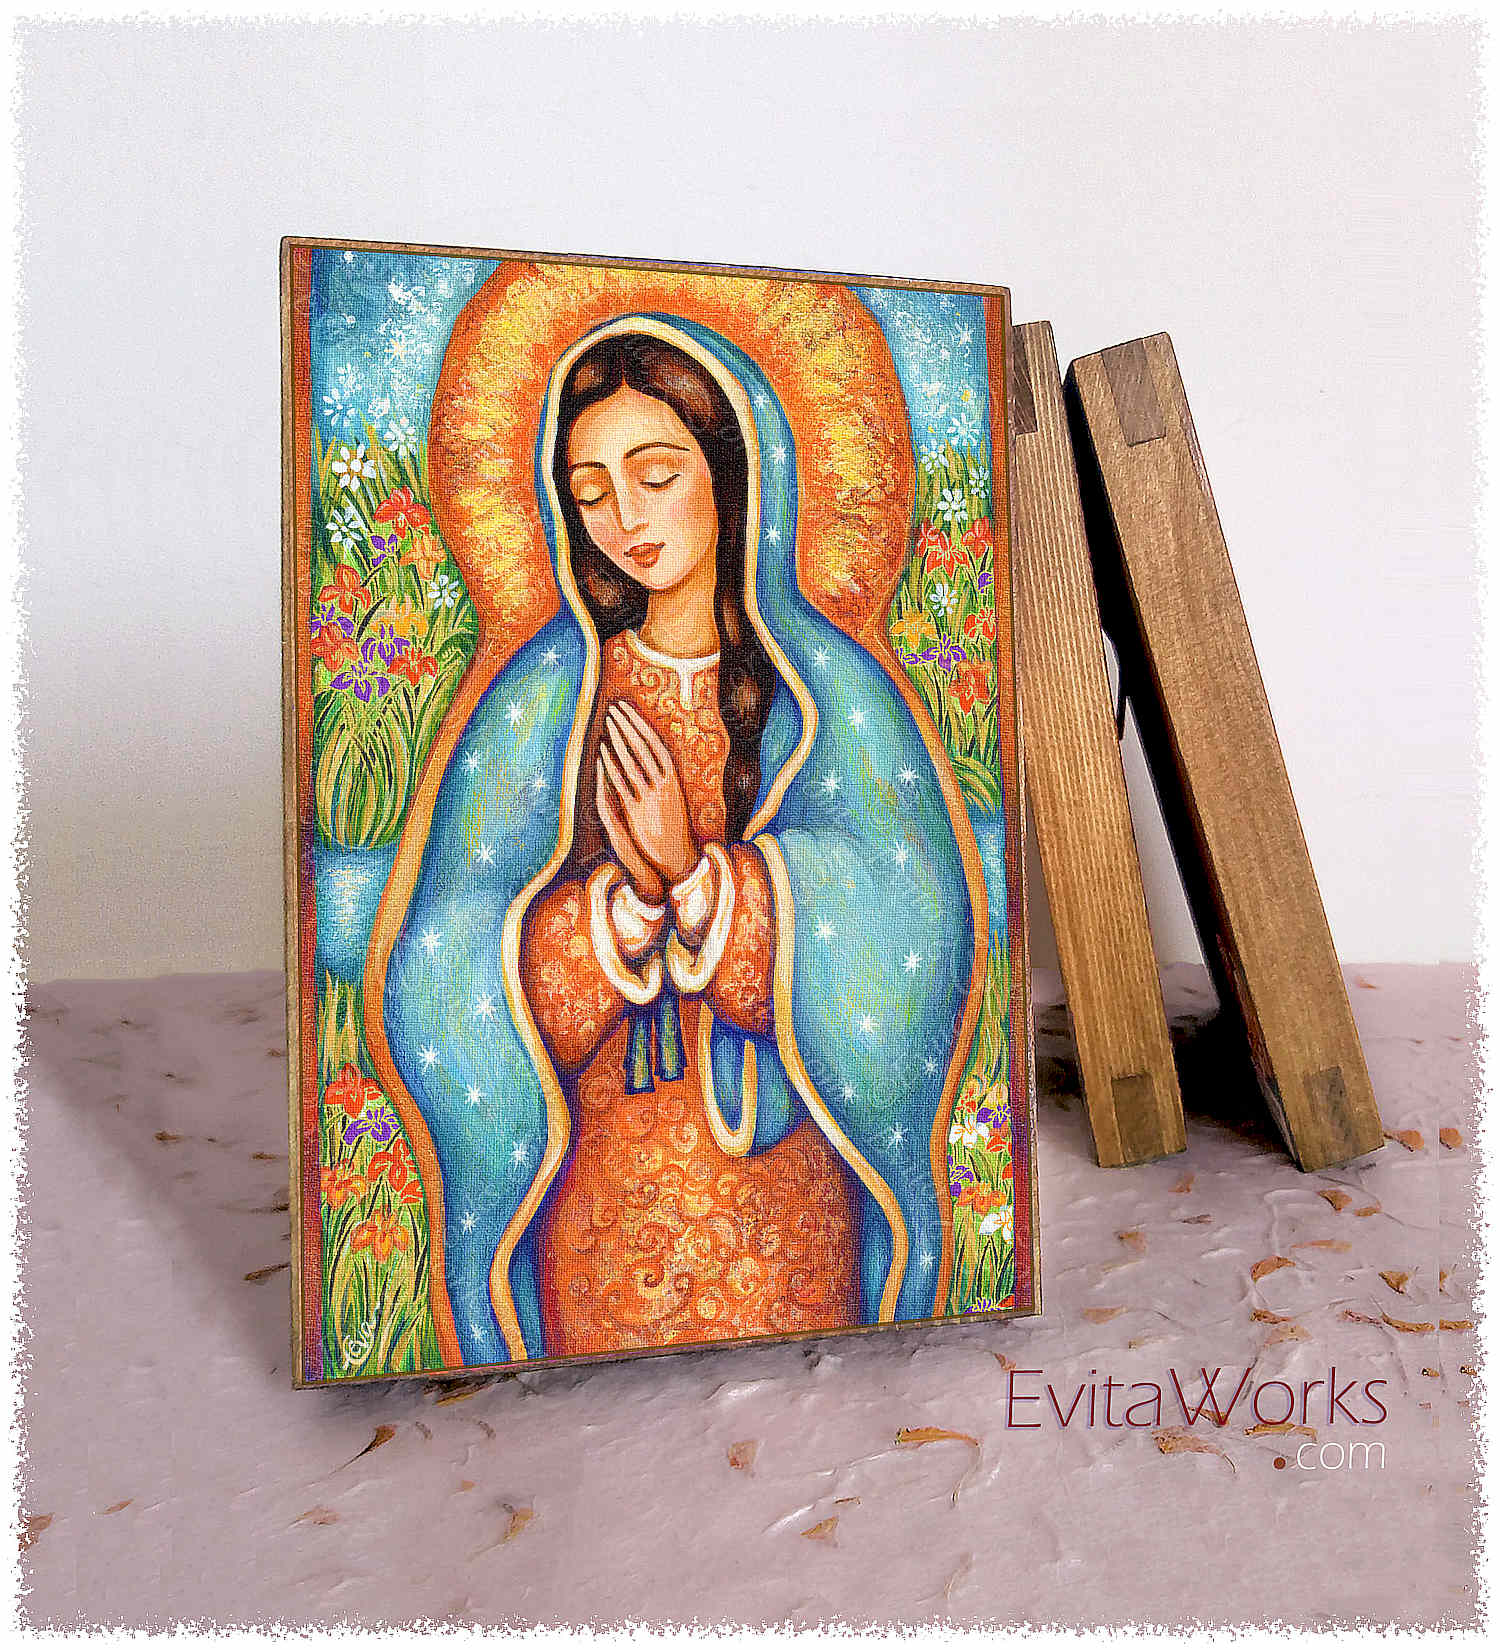 Hit to learn about "The Virgin of Guadalupe" on woodblocks